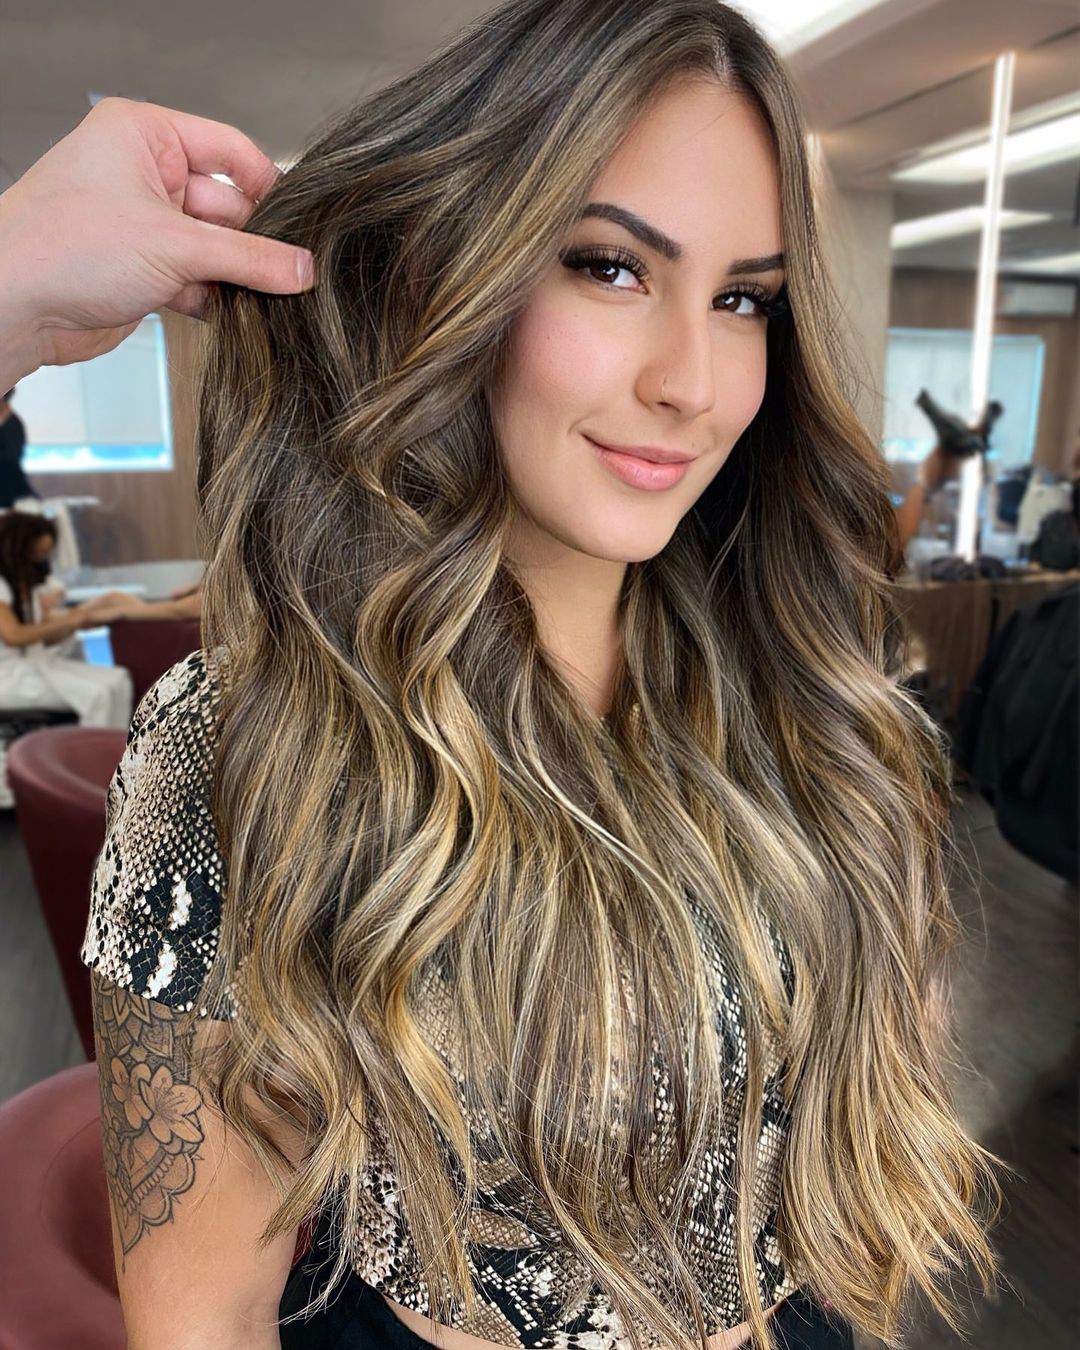 100+ Trendy Hairstyle Ideas For Women To Try In 2021 images 40